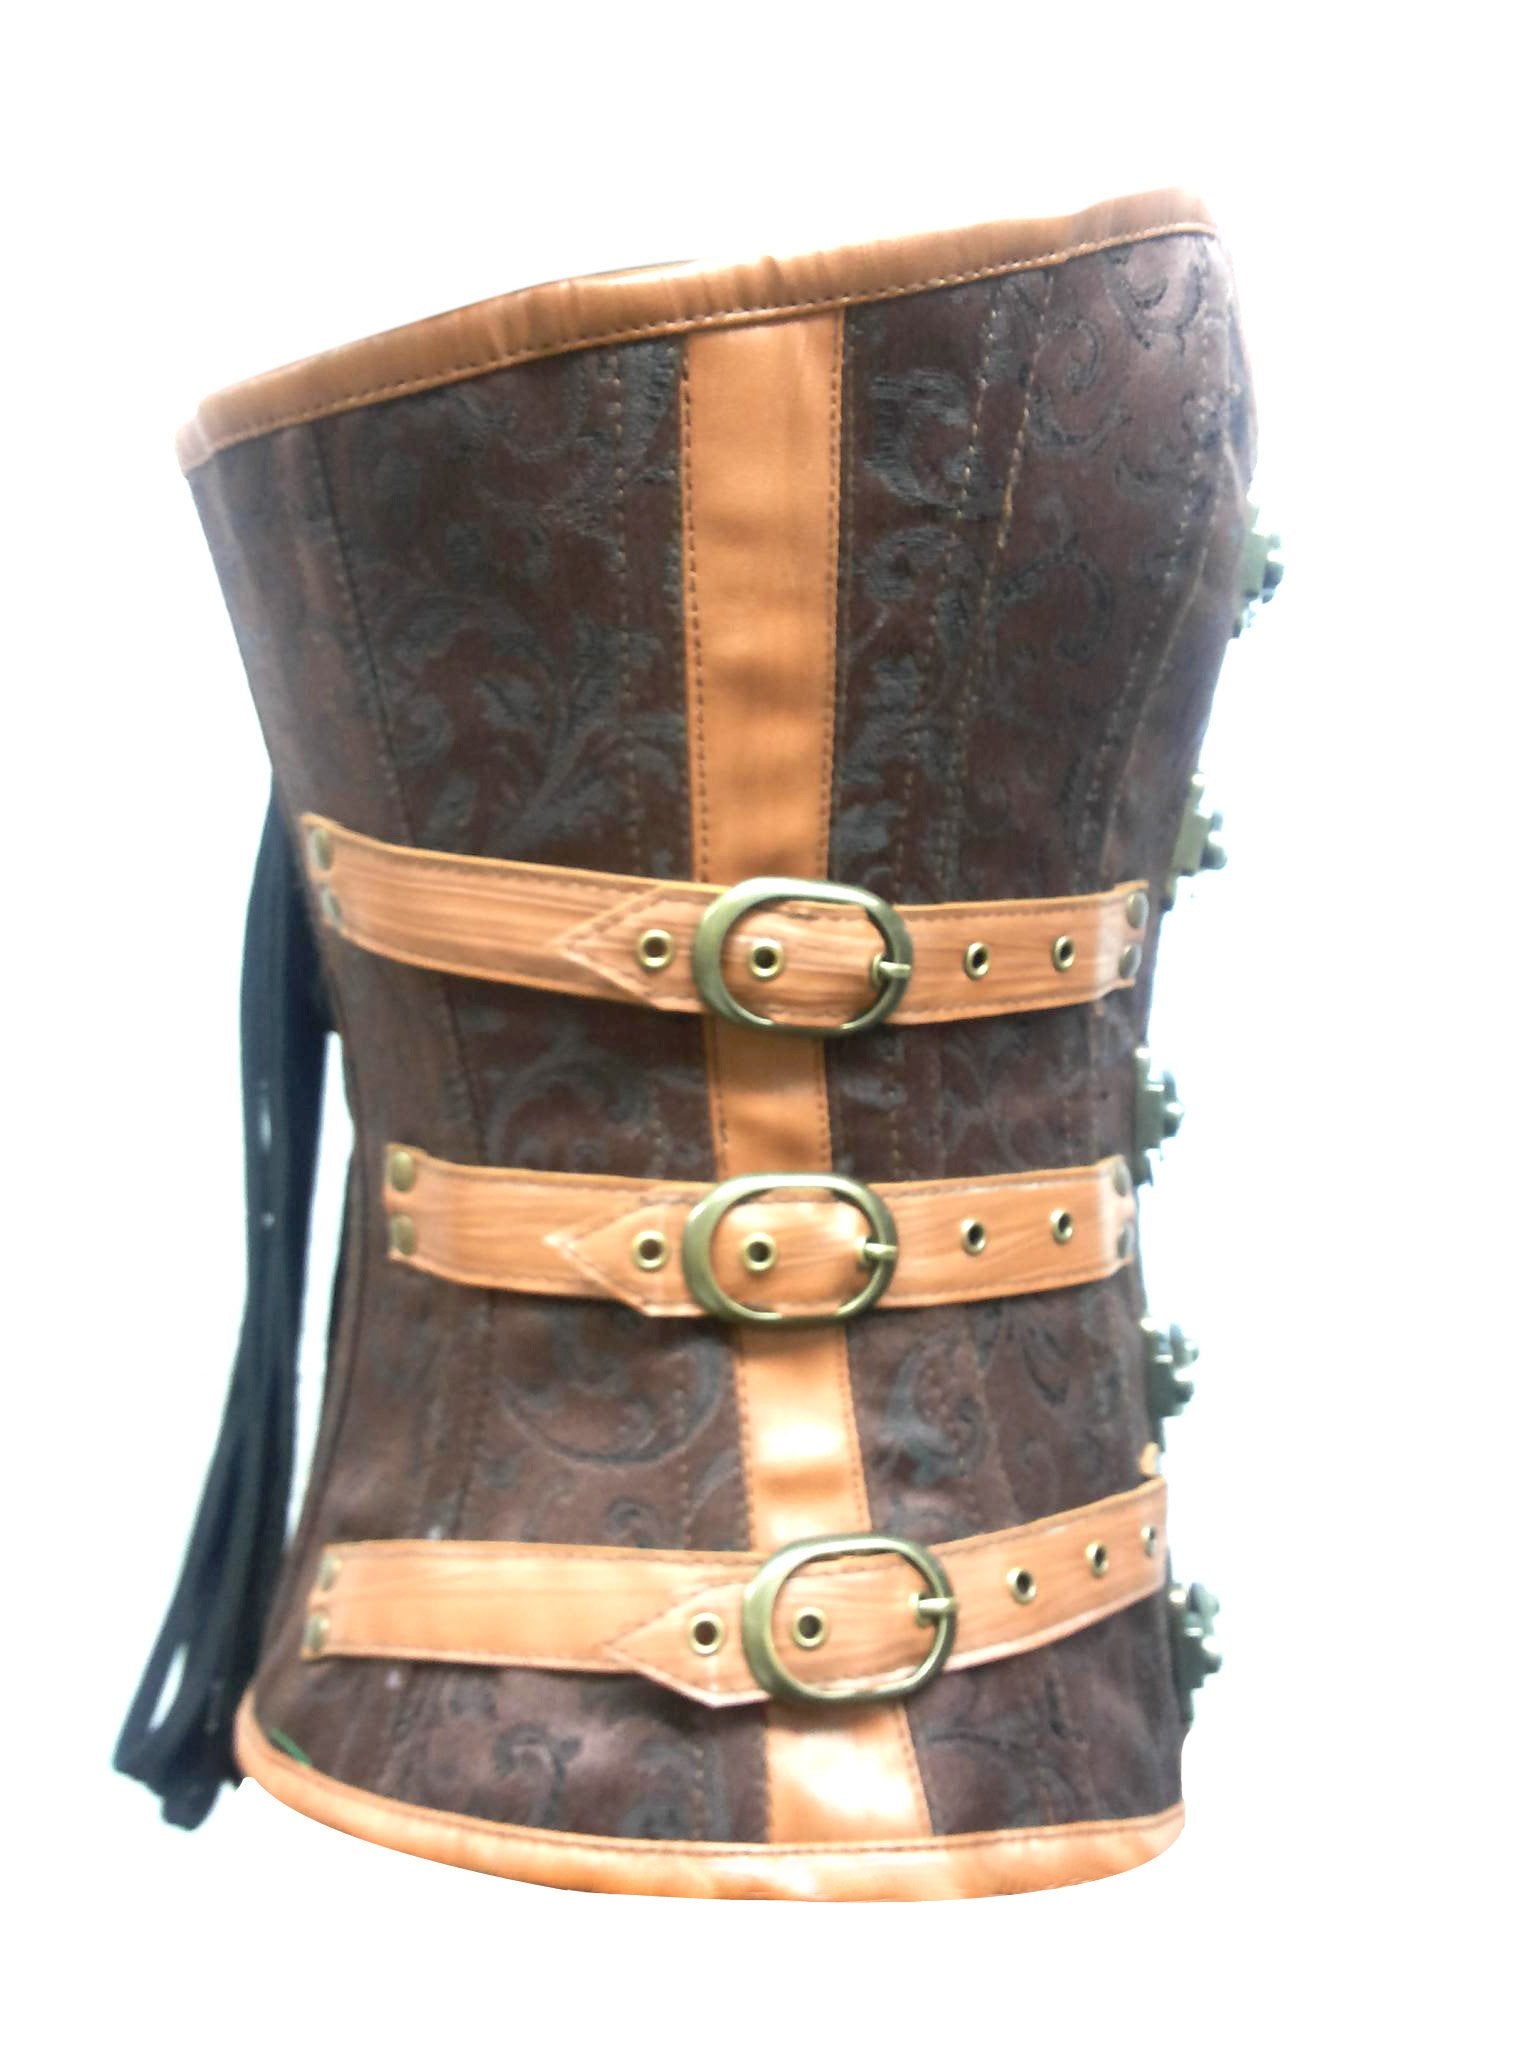 Steampunk Red Brocade Overbust Corset - CT-VG-18065 - Medieval Collectibles